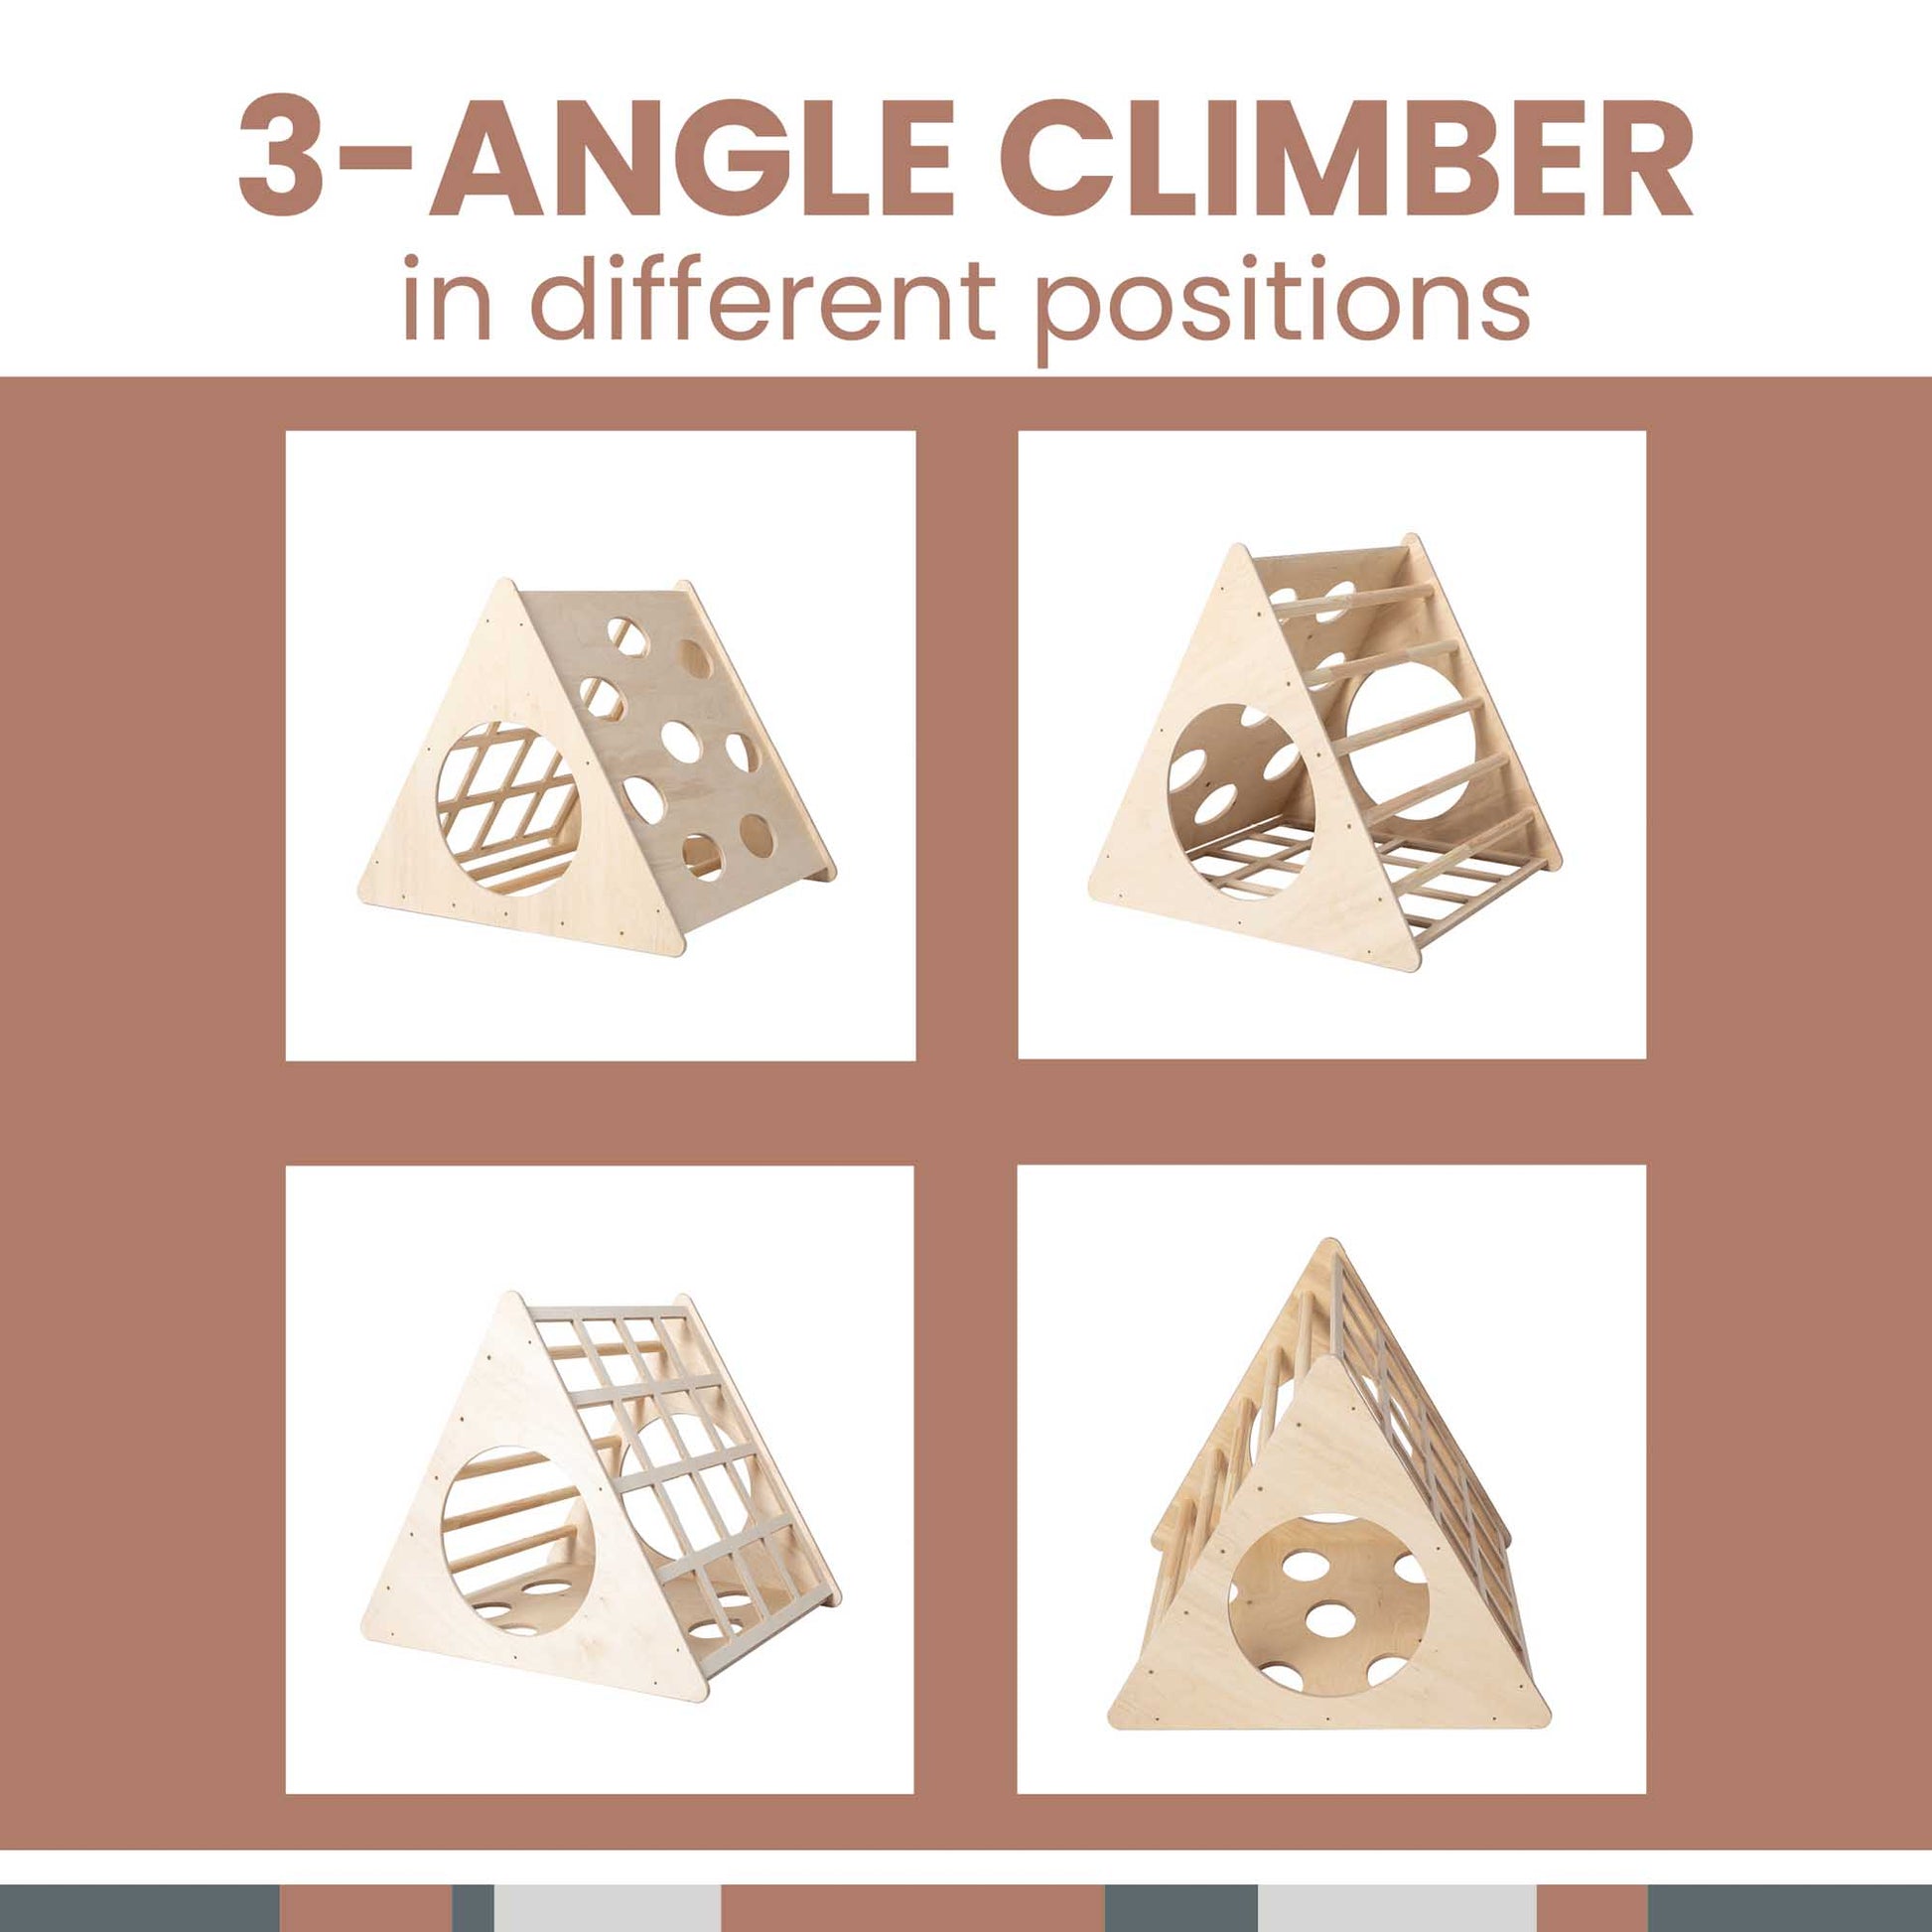 Climbing triangle with sensory panels in different positions.